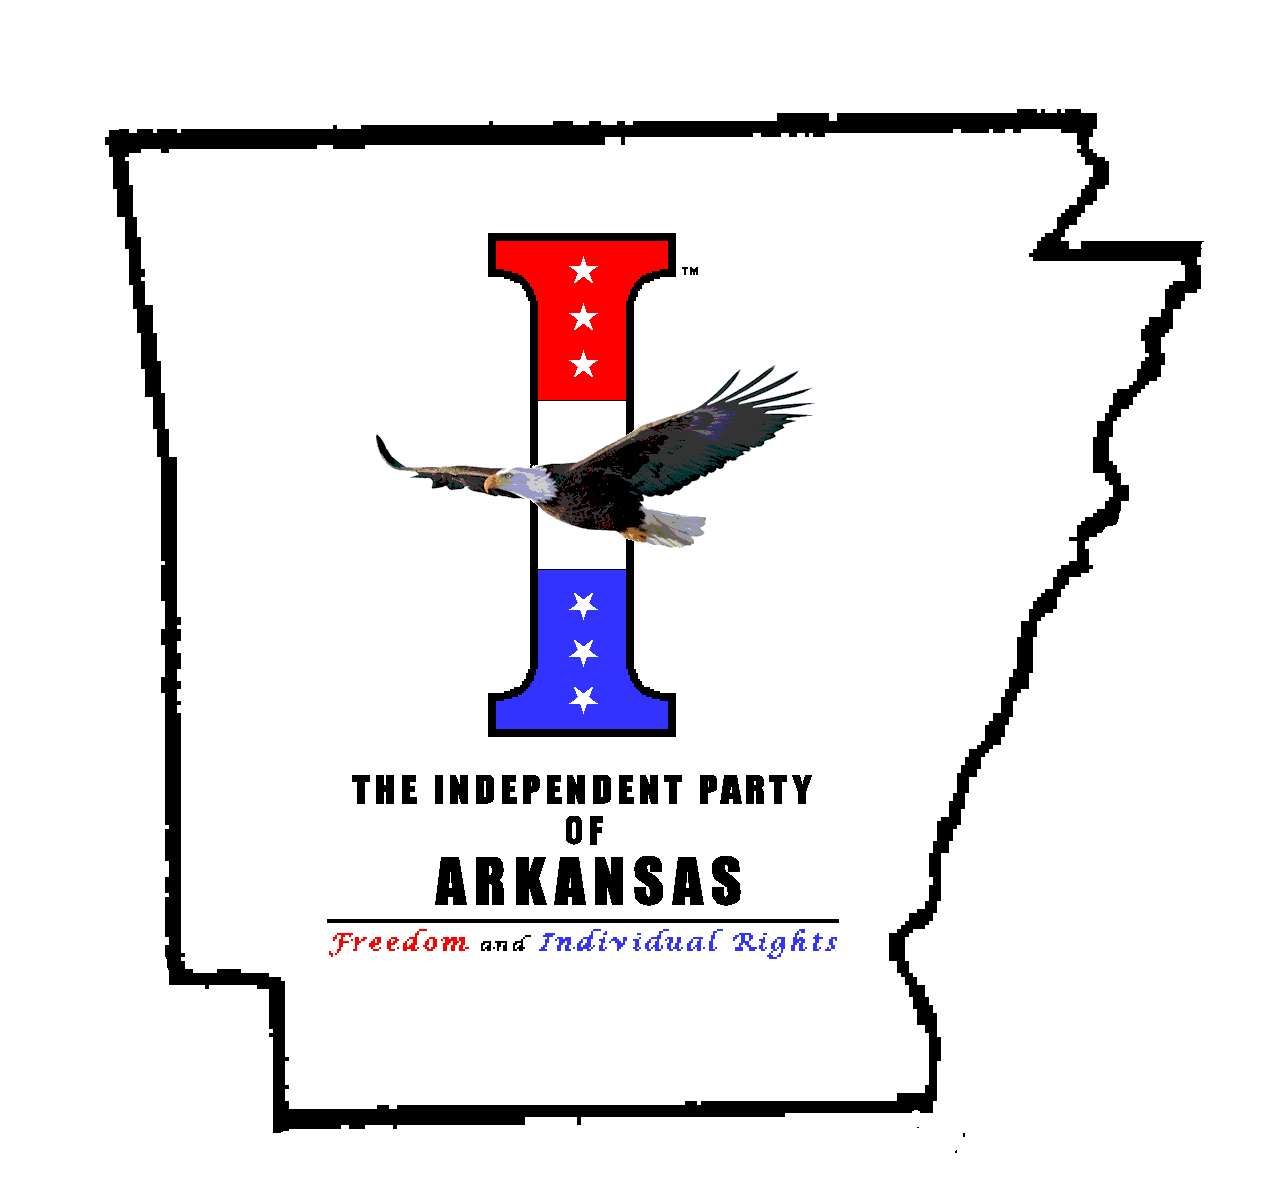 The Independent Party of Arkansas!